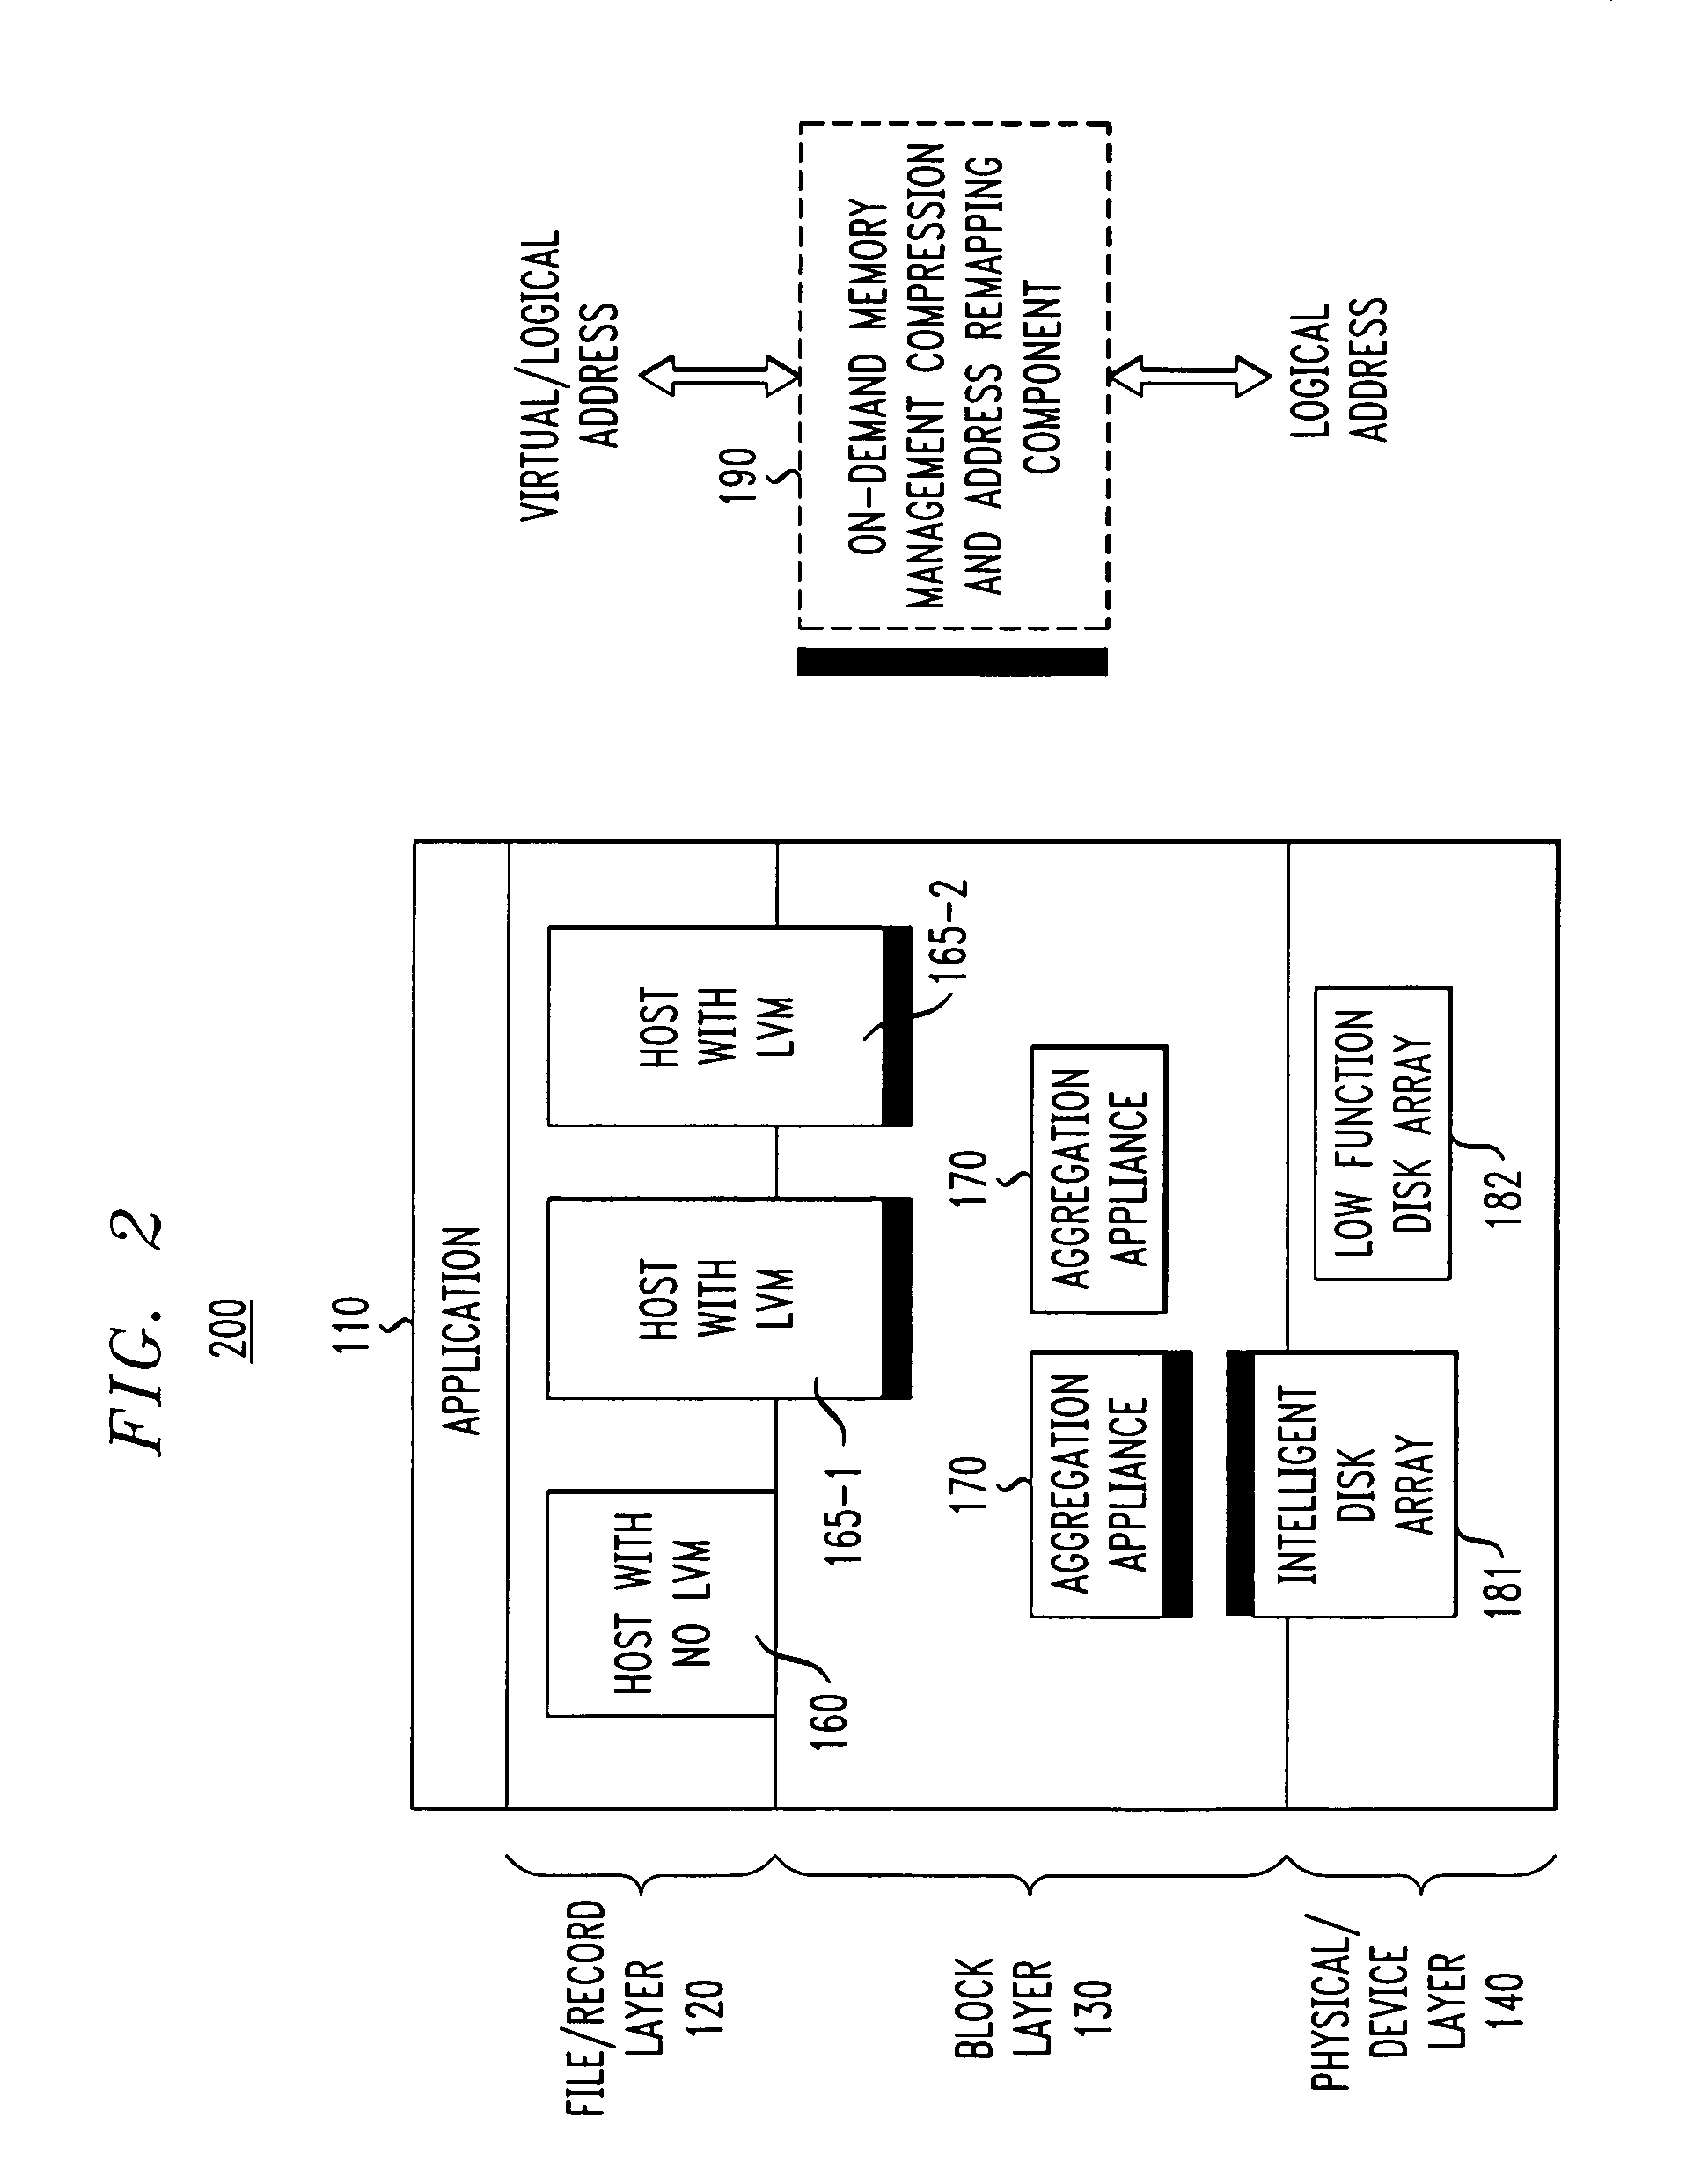 Method and apparatus for increasing virtual storage capacity in on-demand storage systems